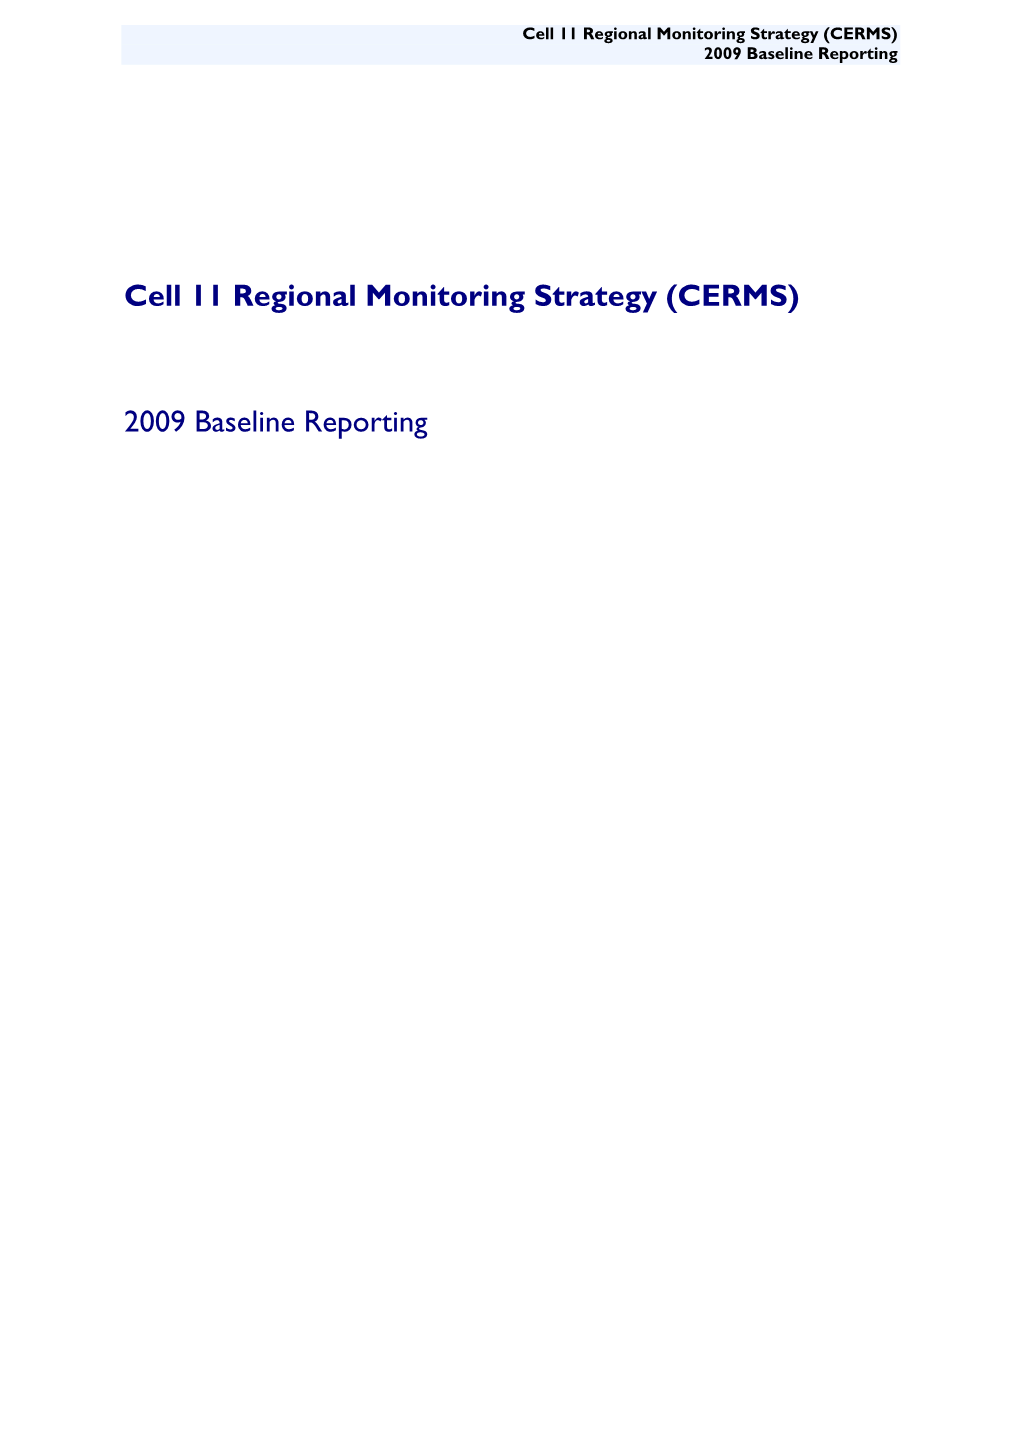 Cell 11 Regional Monitoring Strategy (CERMS) 2009 Baseline Reporting